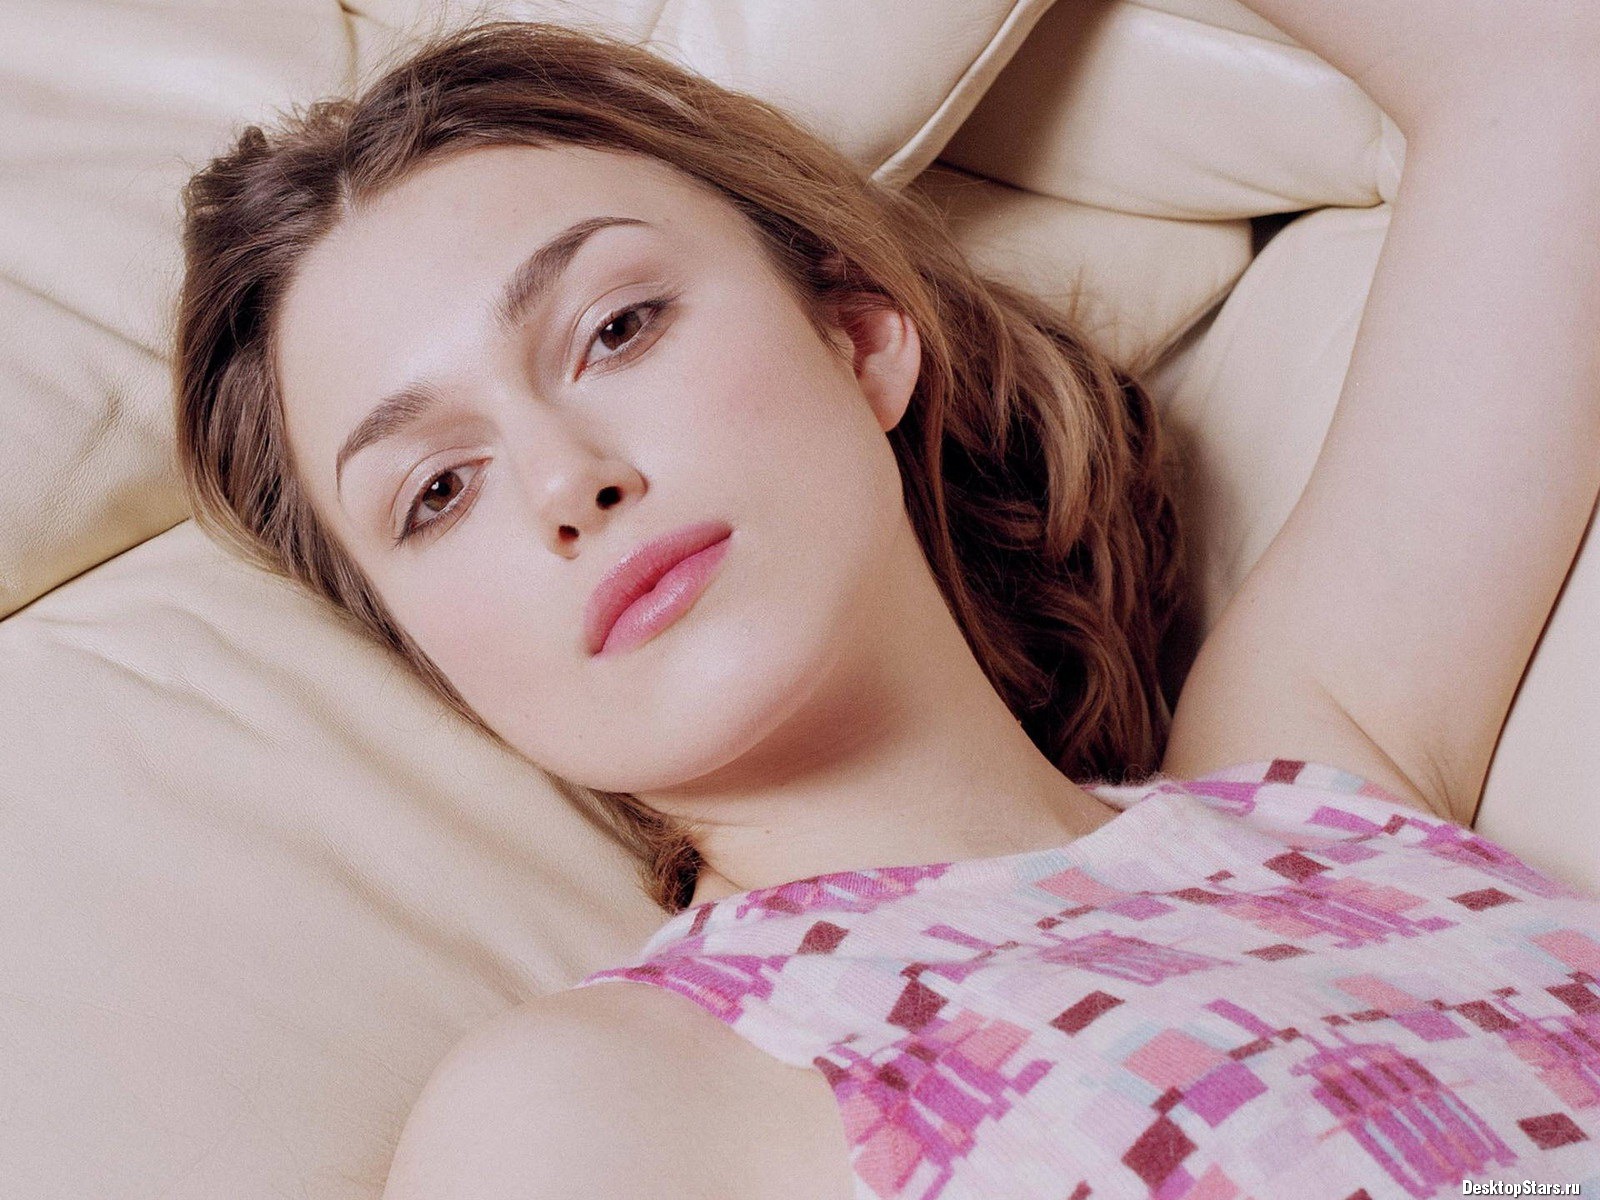 Keira Knightley #022 - 1600x1200 Wallpapers Pictures Photos Images